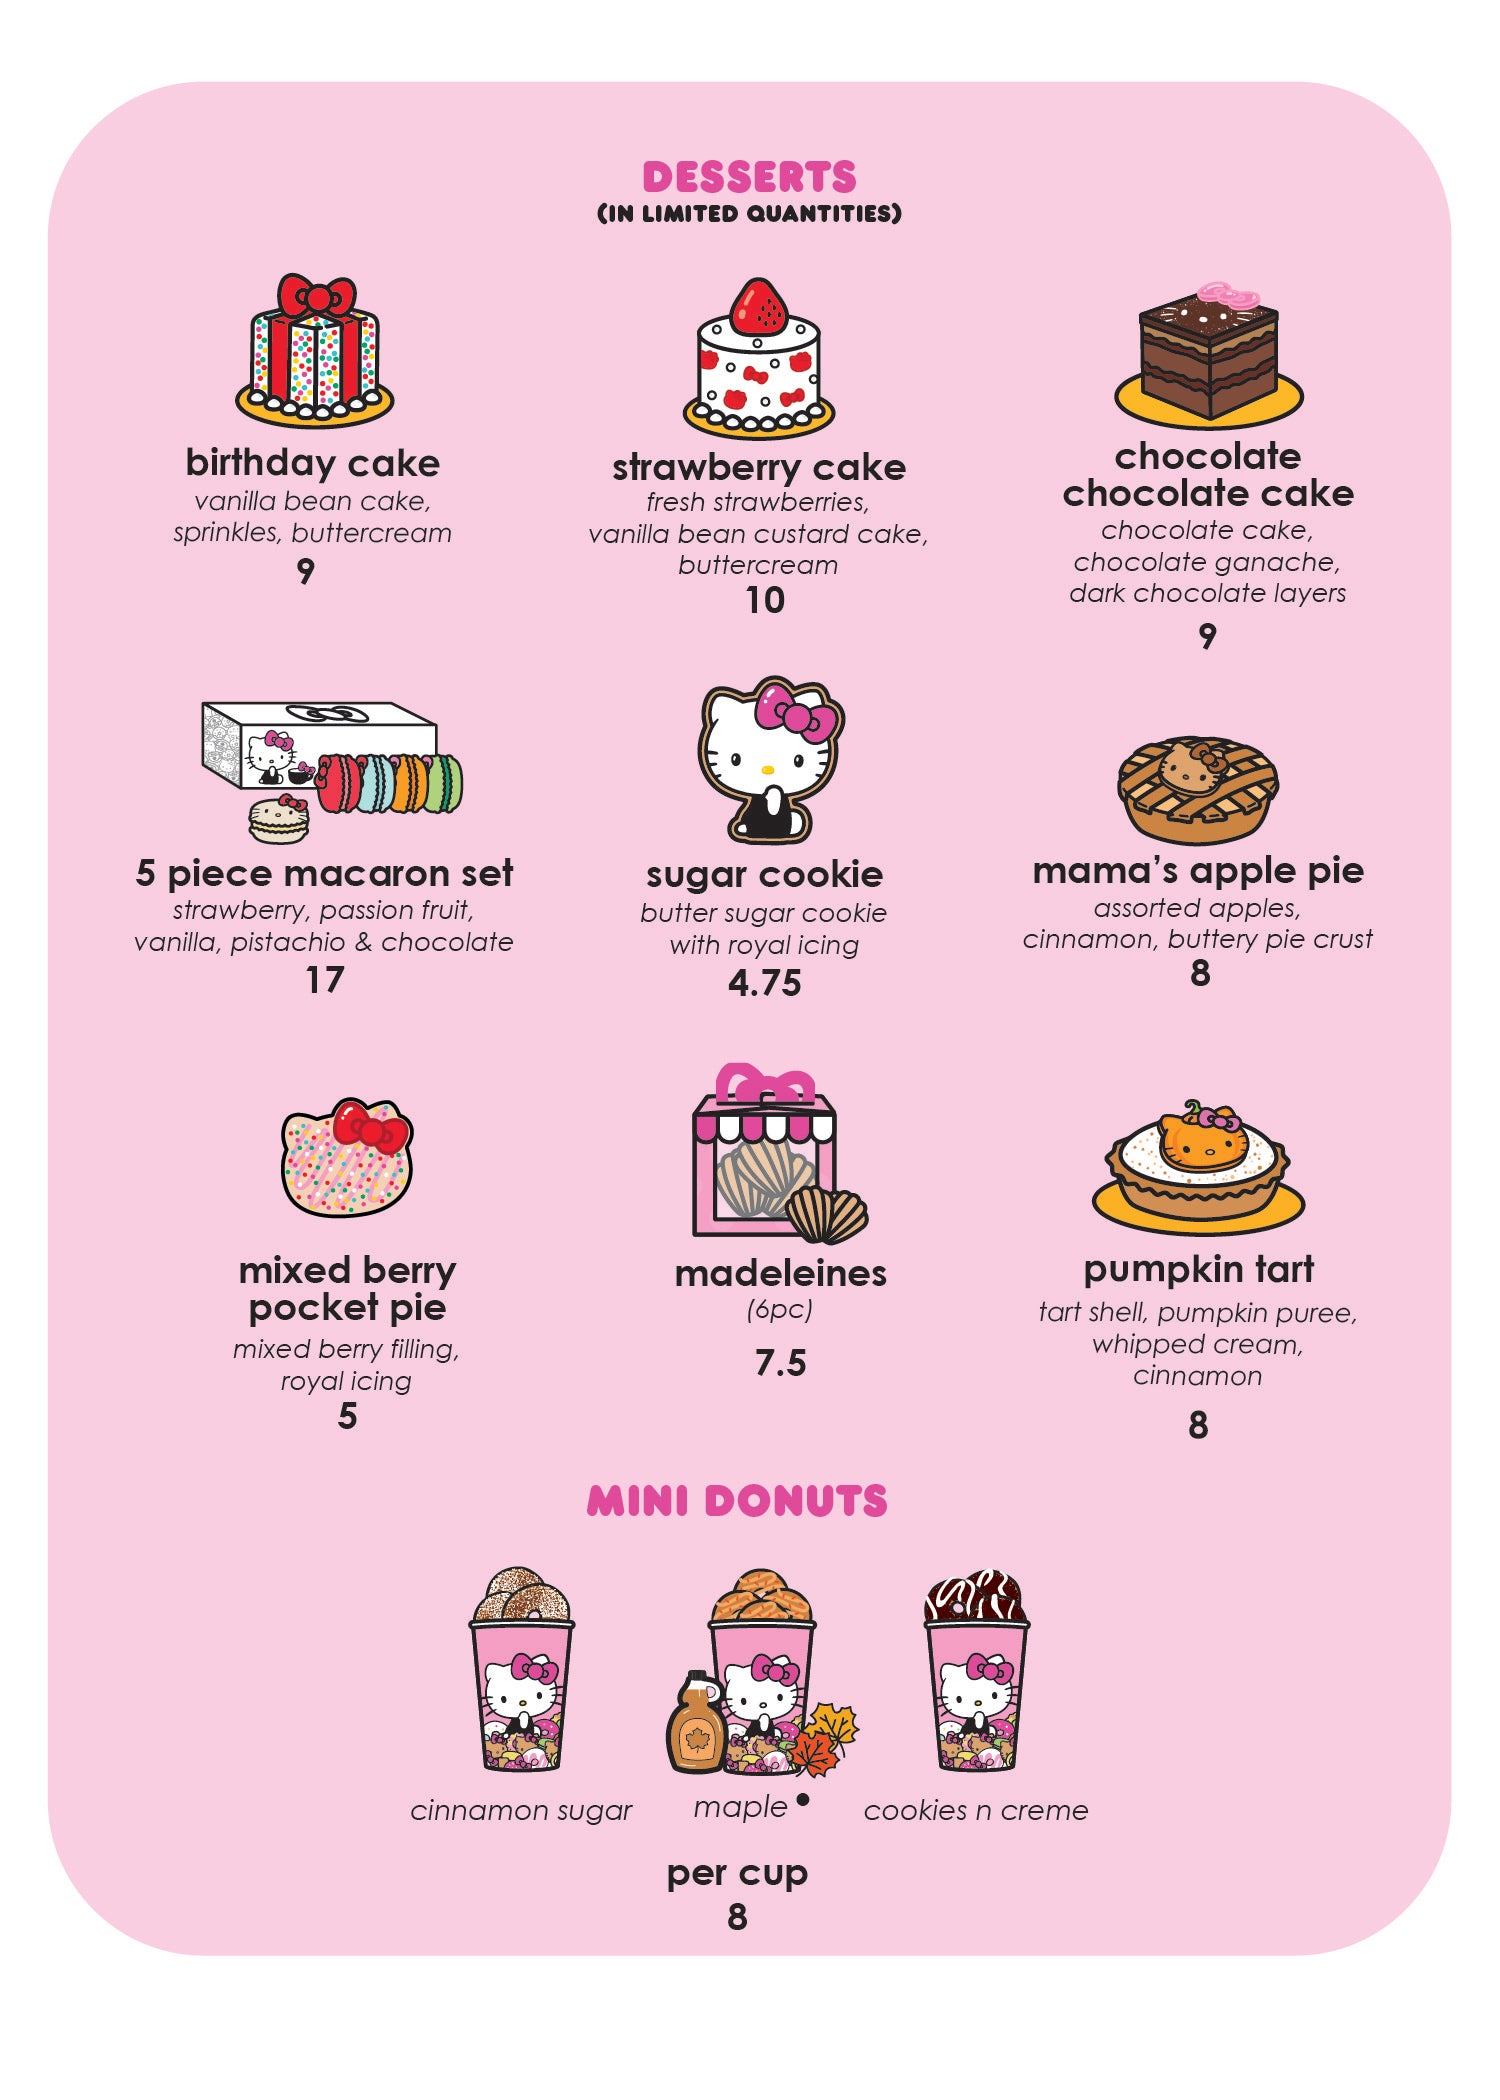 The menu of the Hello Kitty Cafe! - Picture of Hello Kitty Cafe